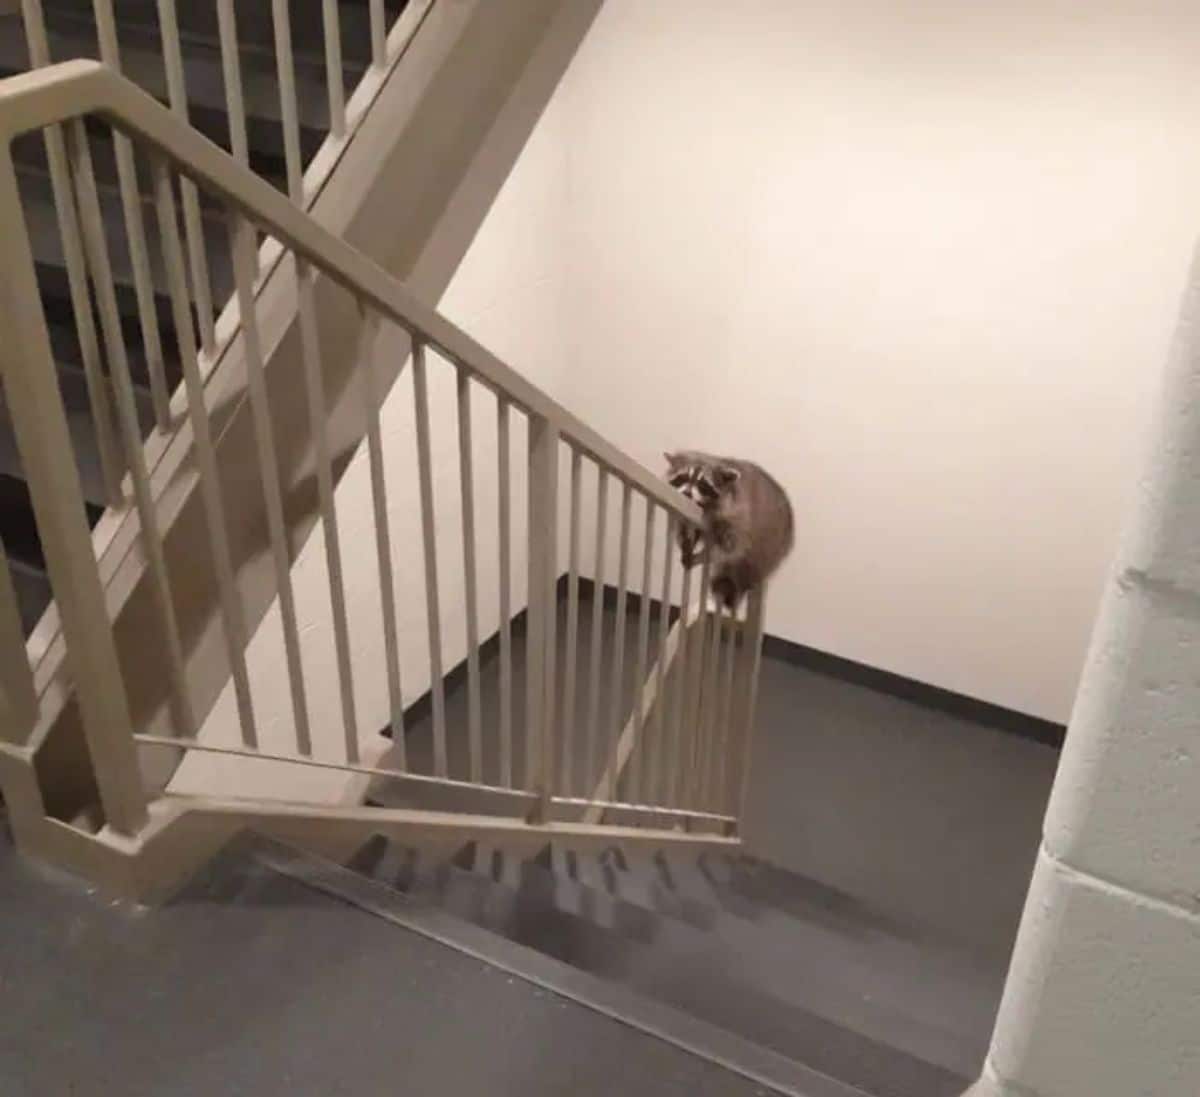 raccoon holding onto the white railings in a stairway